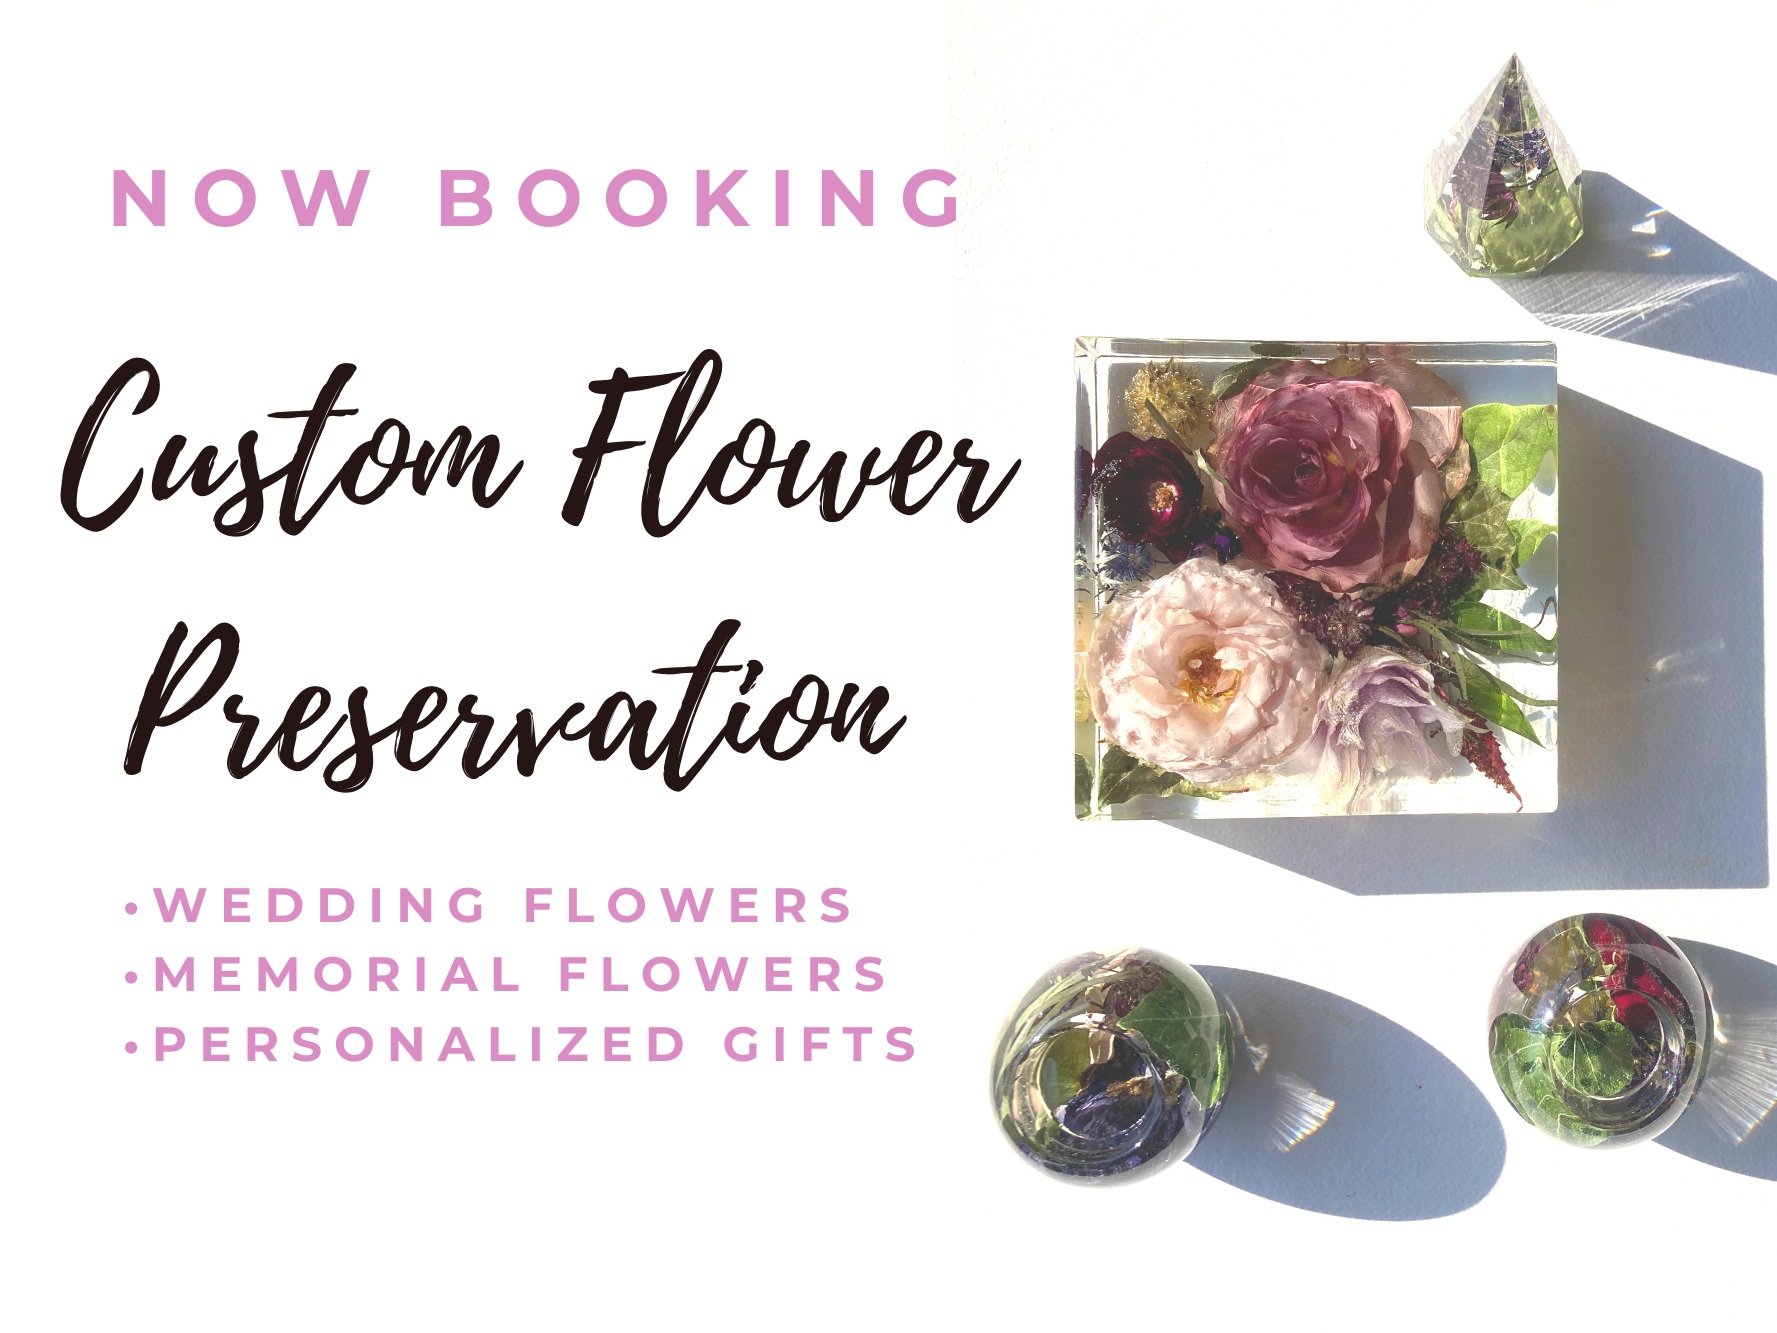 Blessed & Pressed “A Flower Preservation Company”